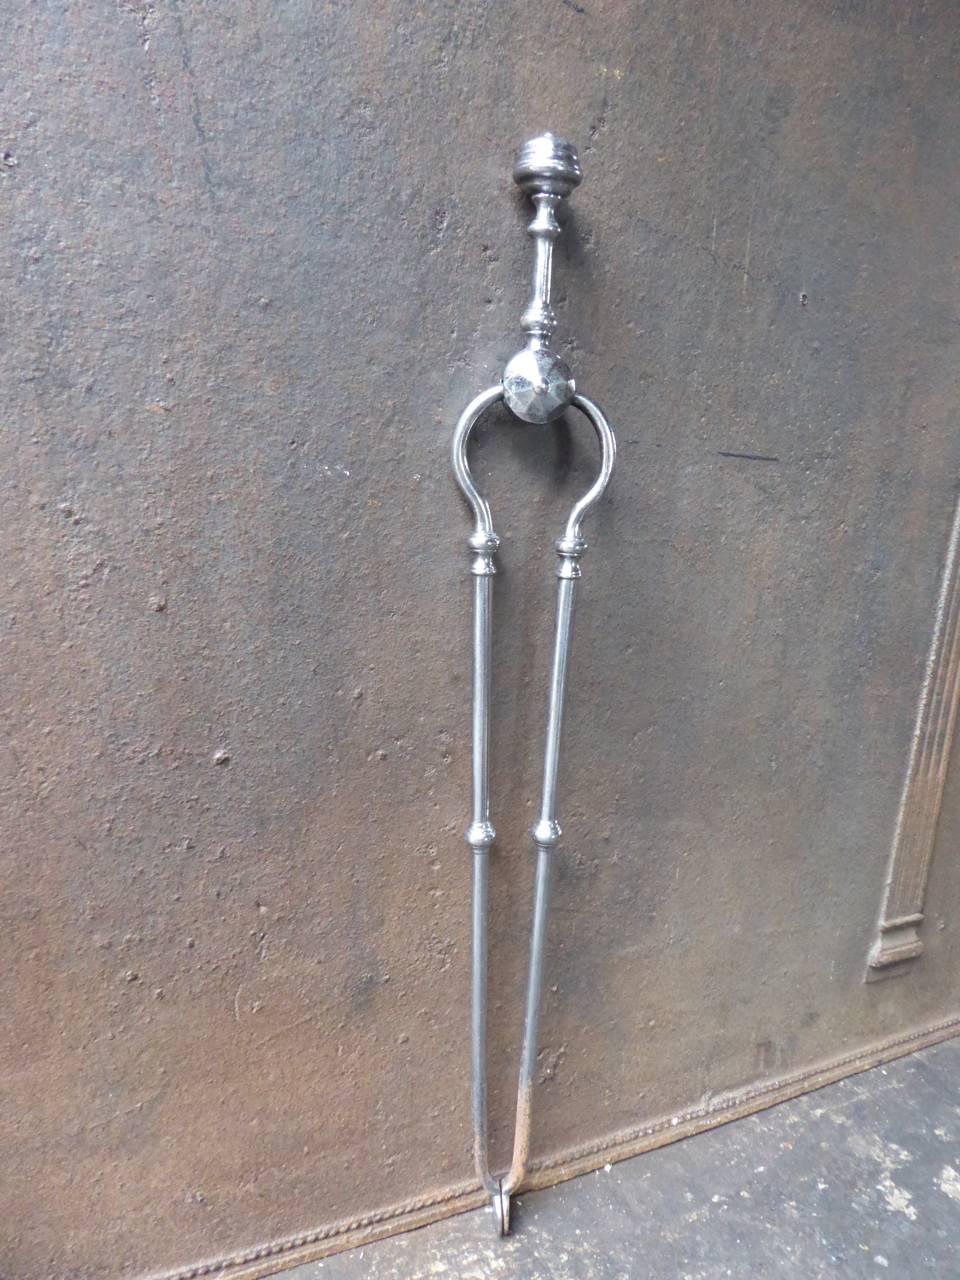 19th century English fire tongs made of polished steel.